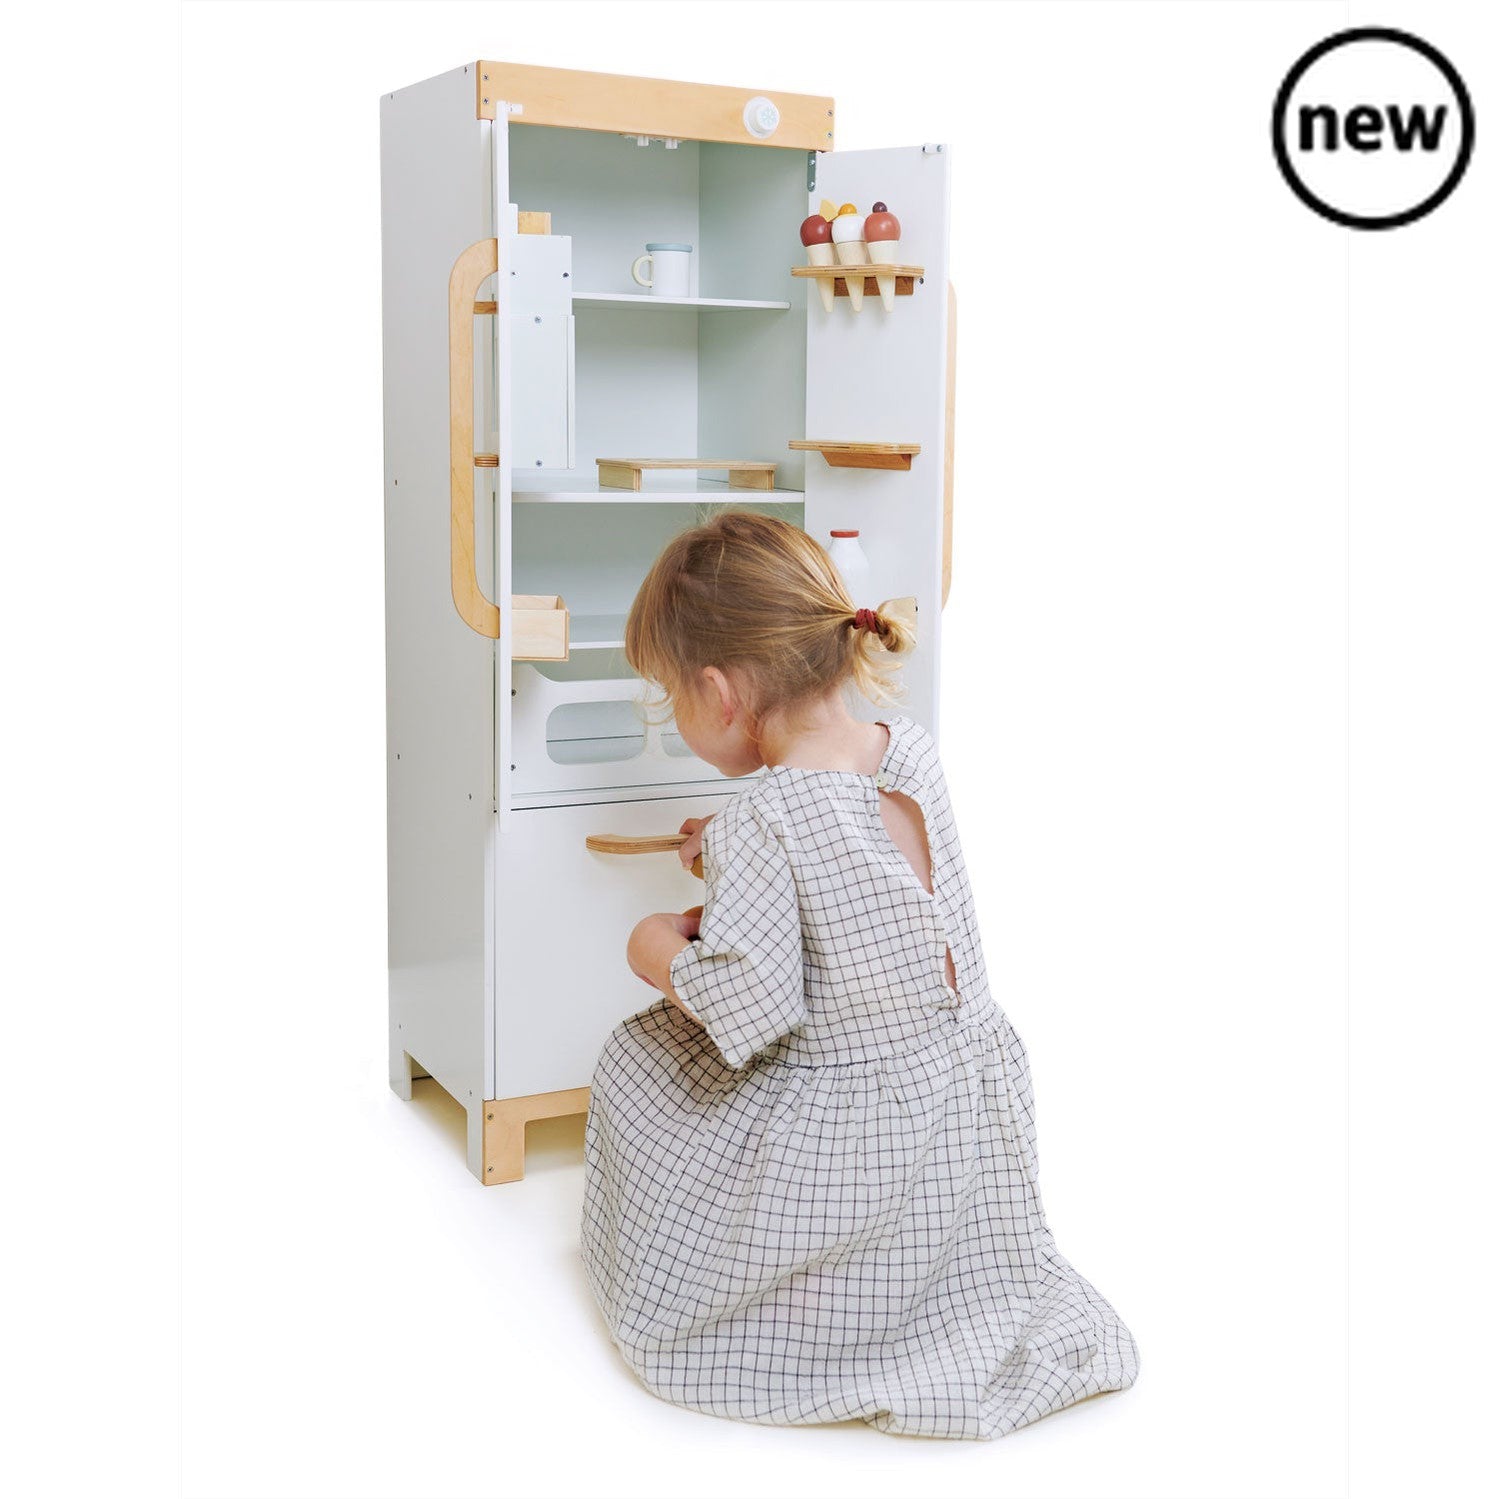 Tenderleaf Toys Wooden Refrigerator, Need somewhere to chill your ice-creams? A stand-alone white fridge-freezer makes a great addition to our La Fiamma Grand Kitchen. This stylish fridge has a real wow factor with a unique functioning ice cube dispenser which drops ice cubes with the press of a button. Comes with: 3 ice cream cornets 3 brown eggs on an egg stand a bottle of milk and two magnets! Great for role play and creative play! Product size: 1.081x0.386x0.09meters (HxWxD) Suitable for ages 3+, Tender